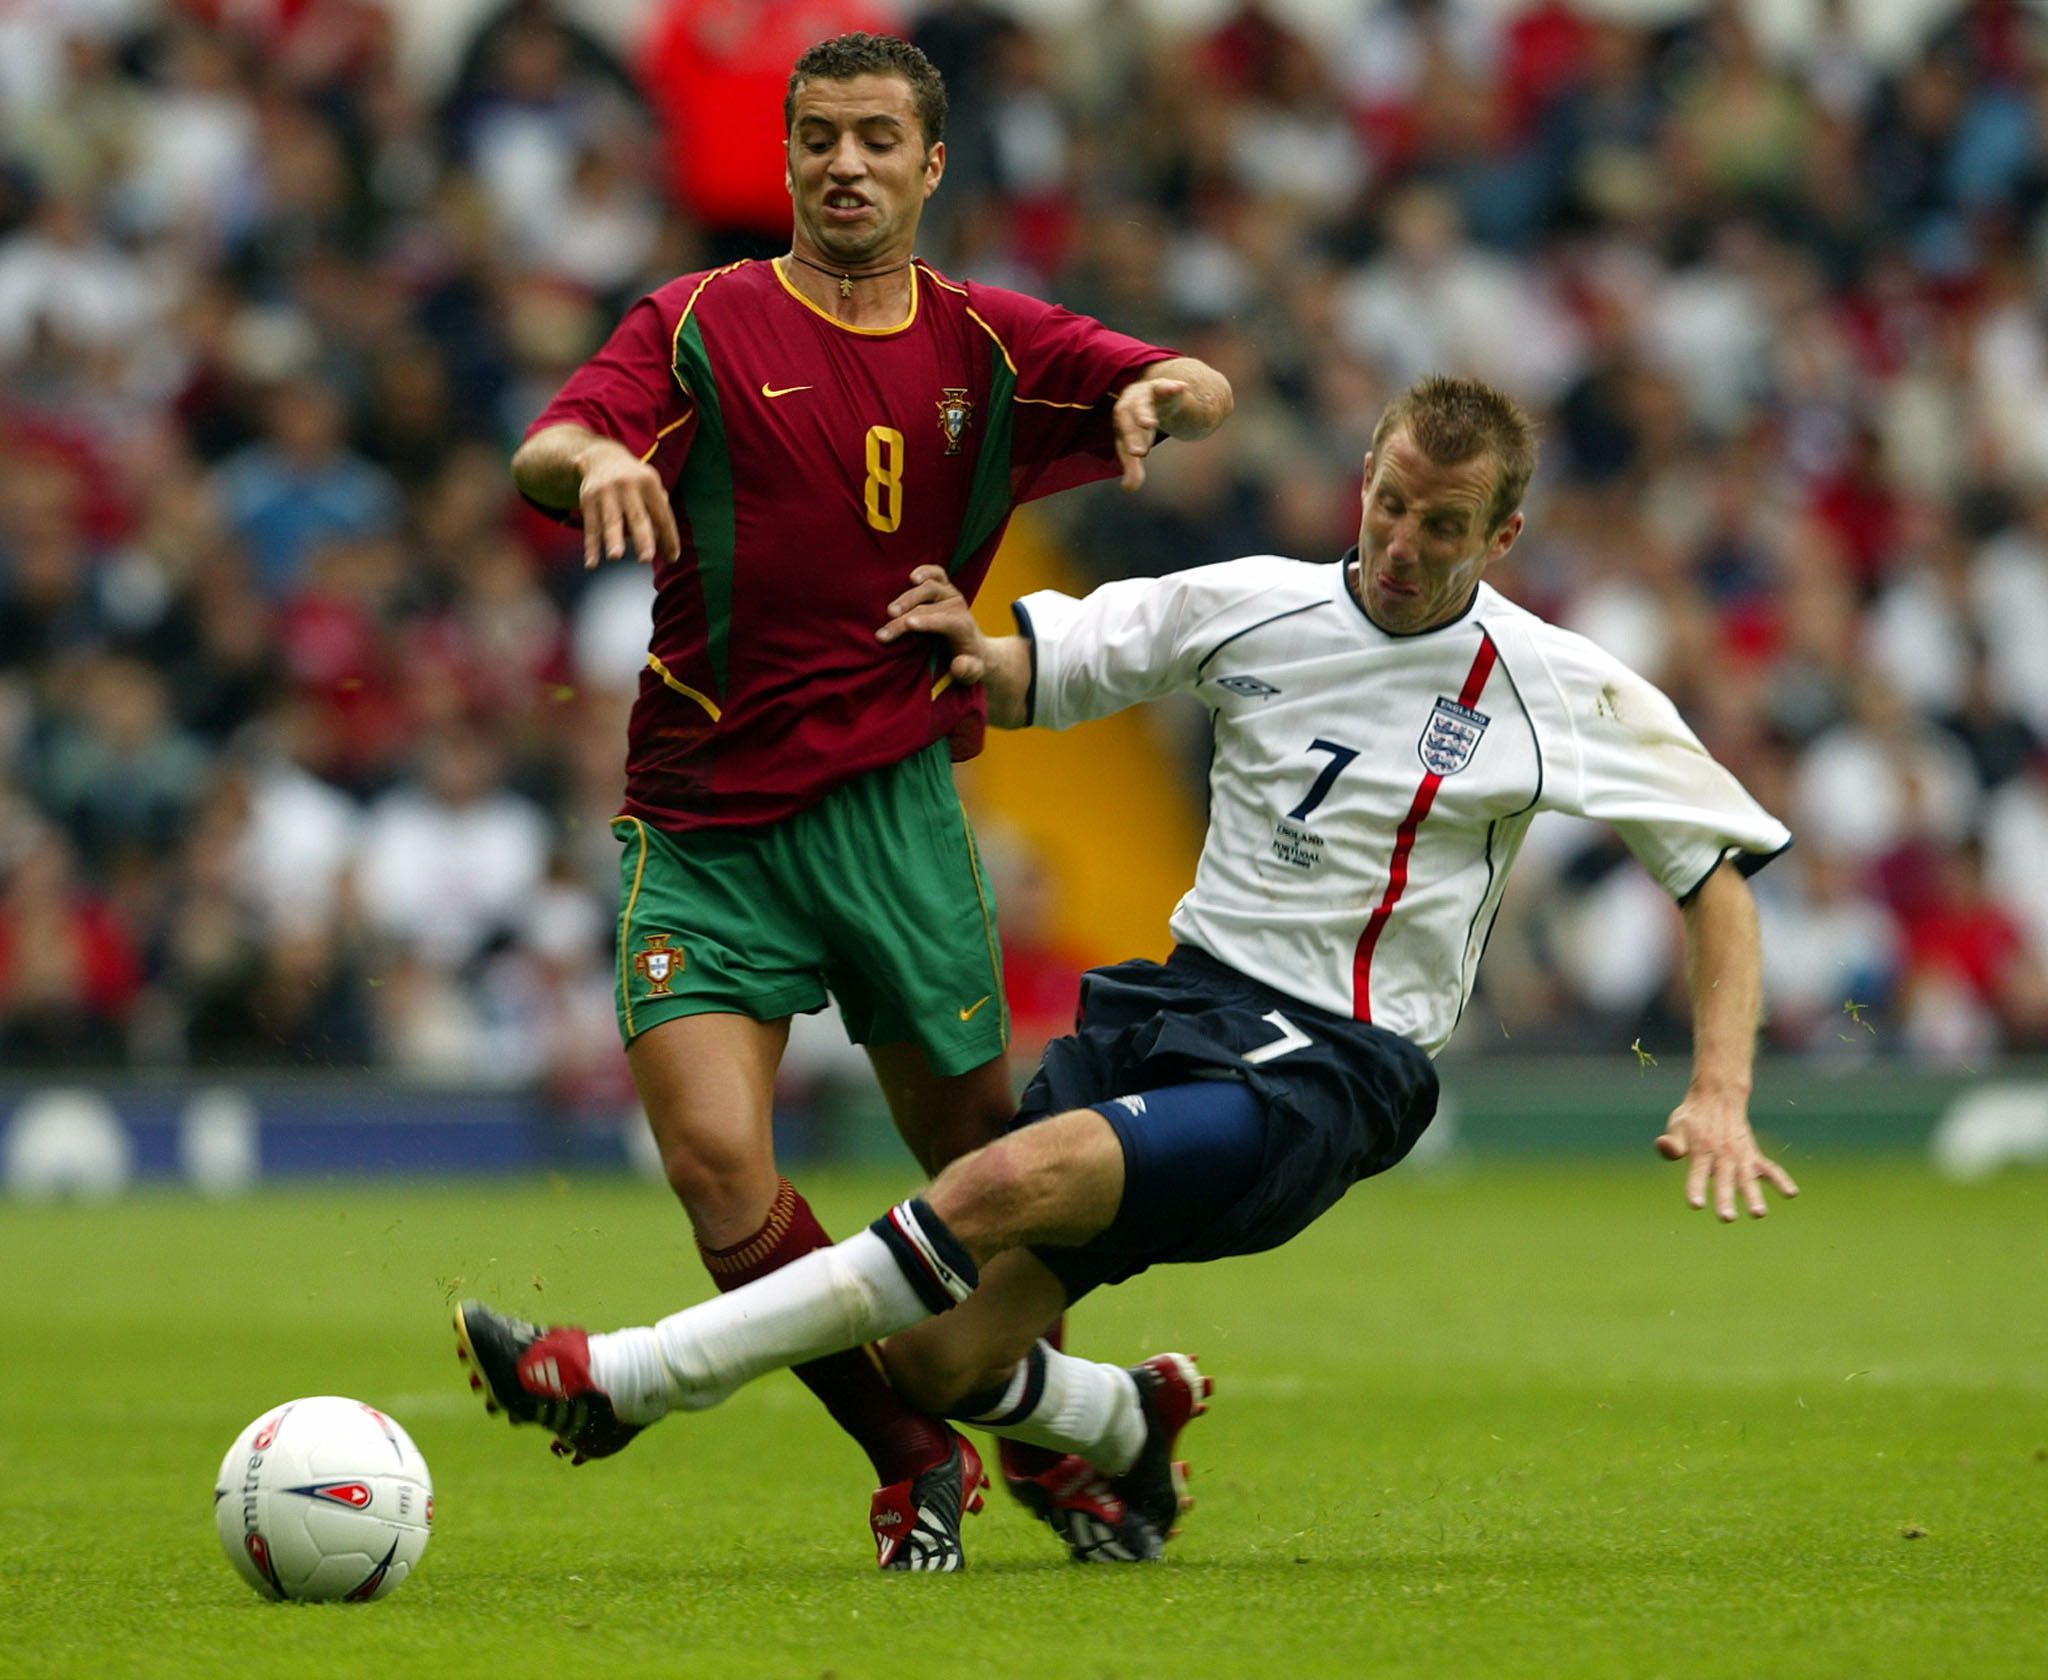 Portugal's Simao Sabrosa (L) is tackled by England's Lee Bowyer in
their friendly international match at the Villa Park in Birmingham
September 7, 2002. England and Portugal drew 1-1. REUTERS/Darren
Staples

DS/NMB/AA